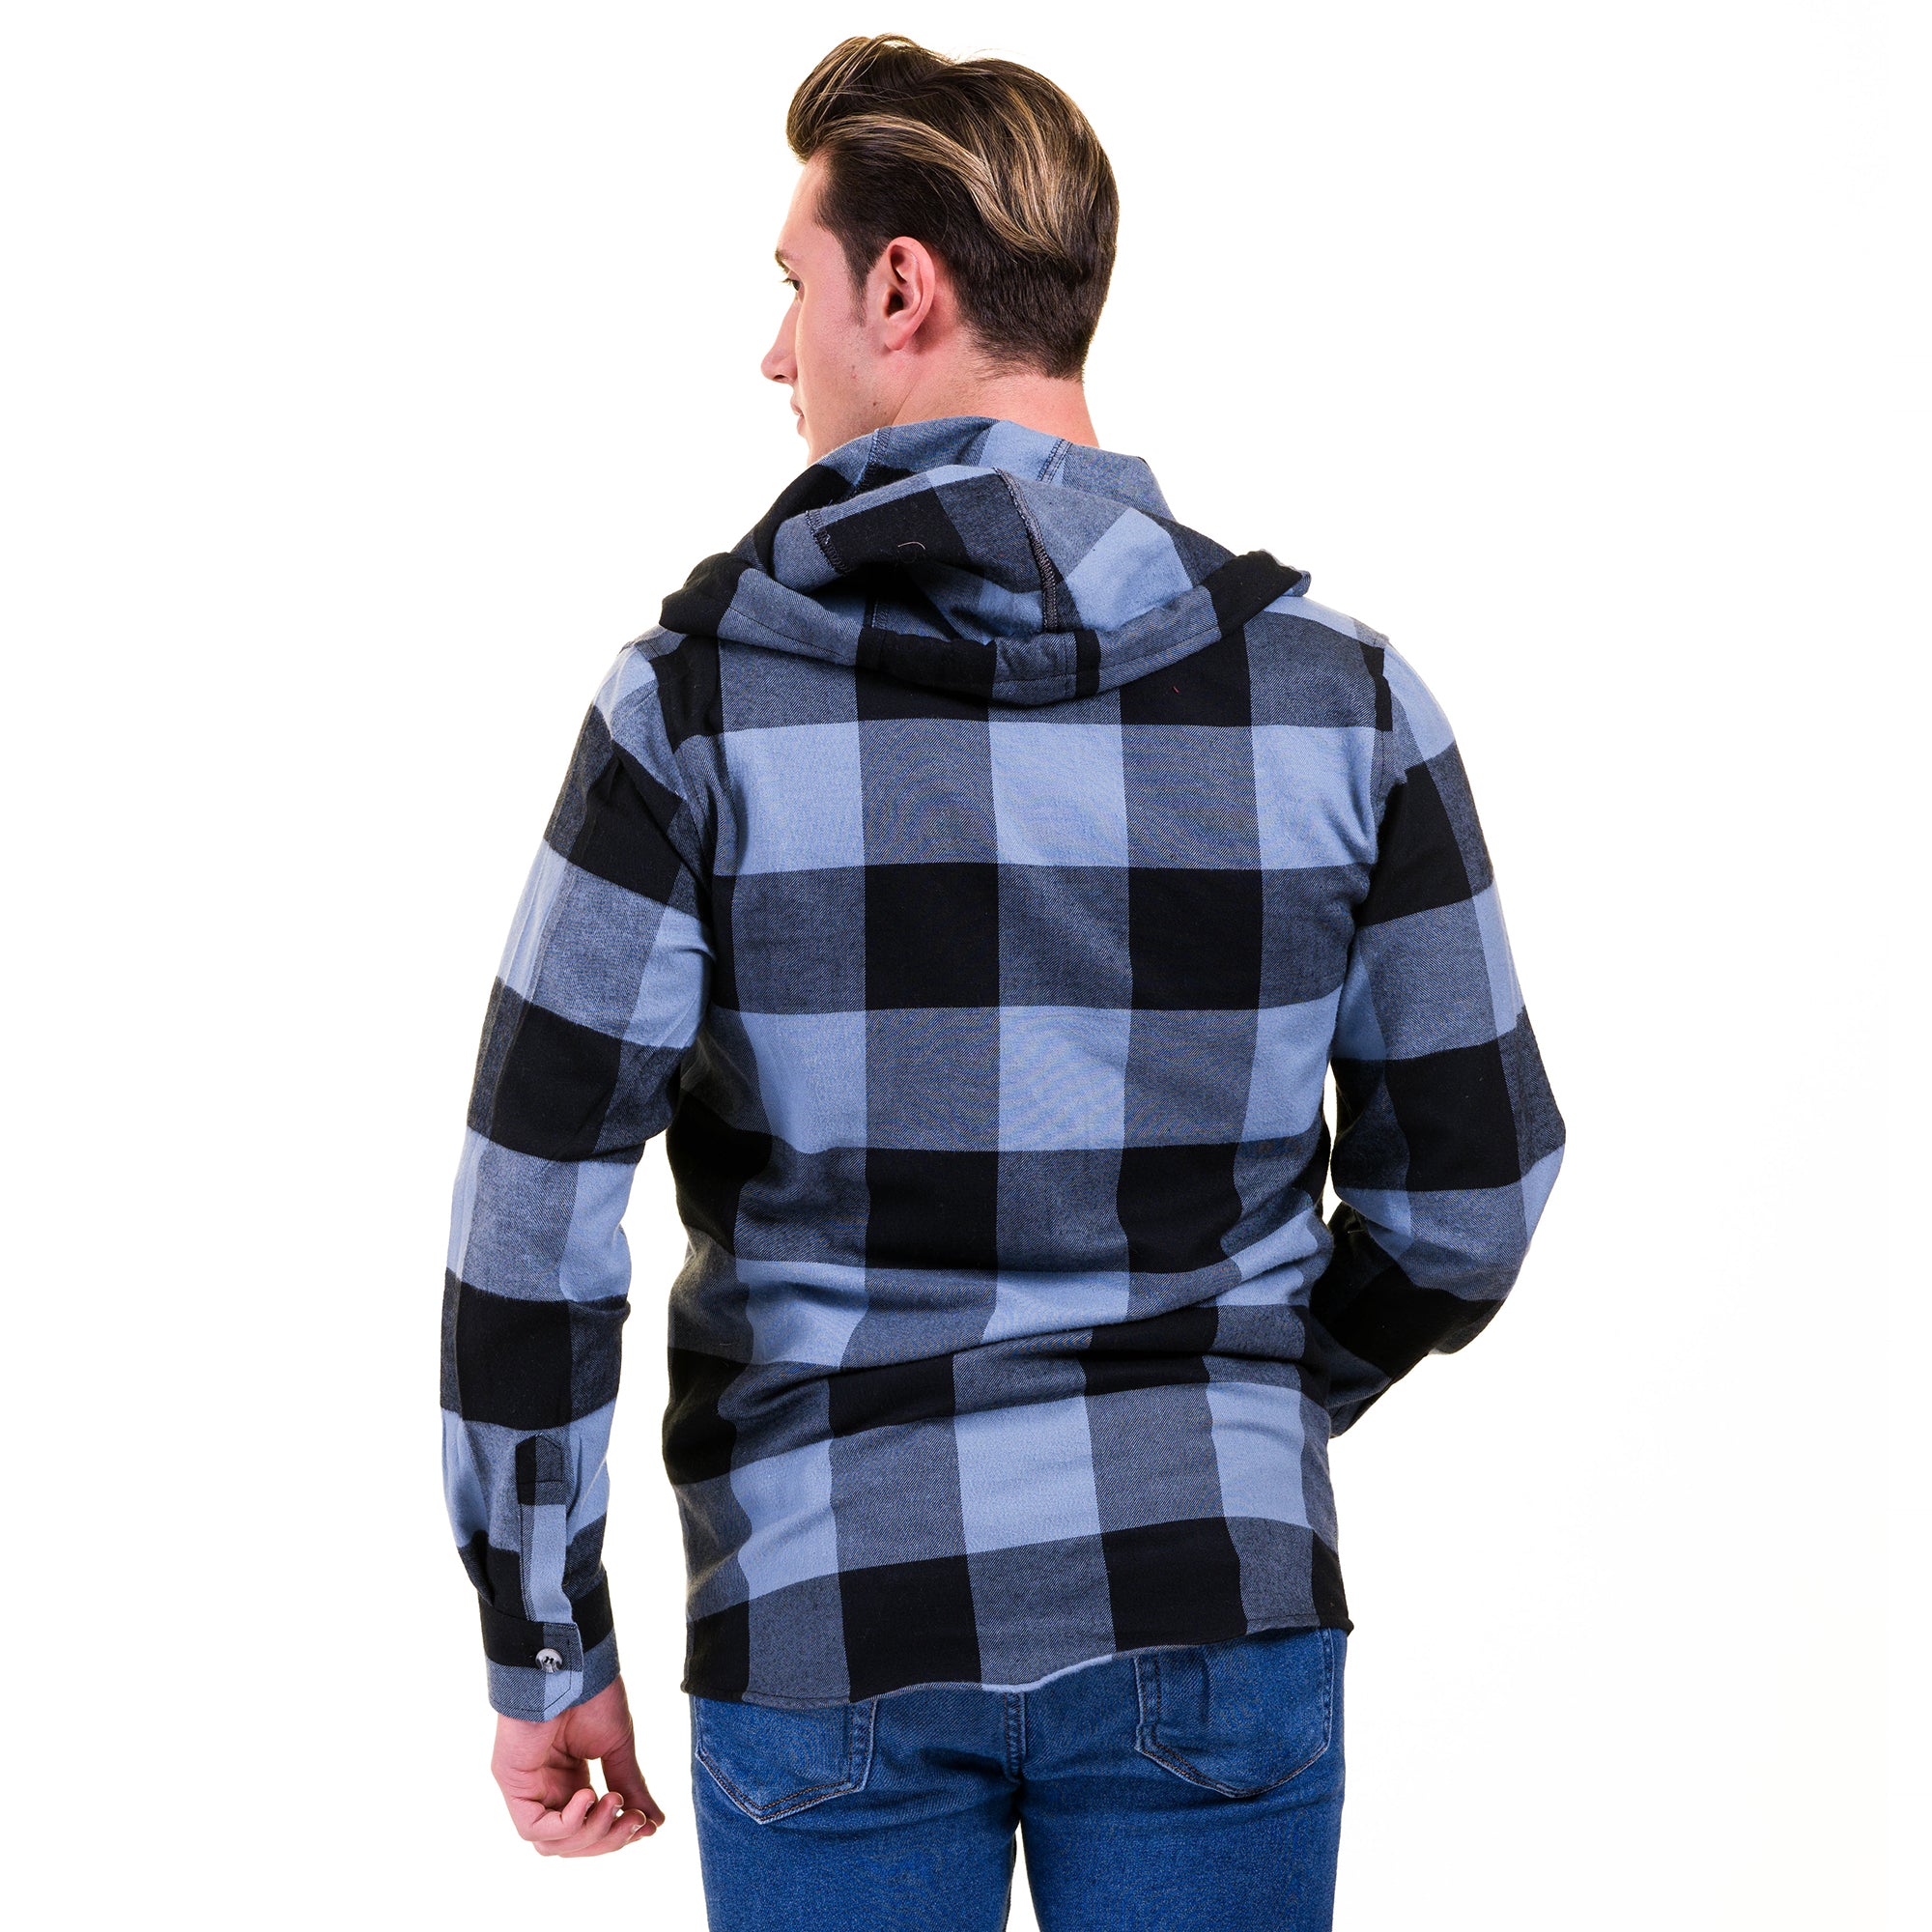 Blue Black Check European Wool Luxury Zippered With Hoodie Sweater Jacket Warm Winter Tailor Fit